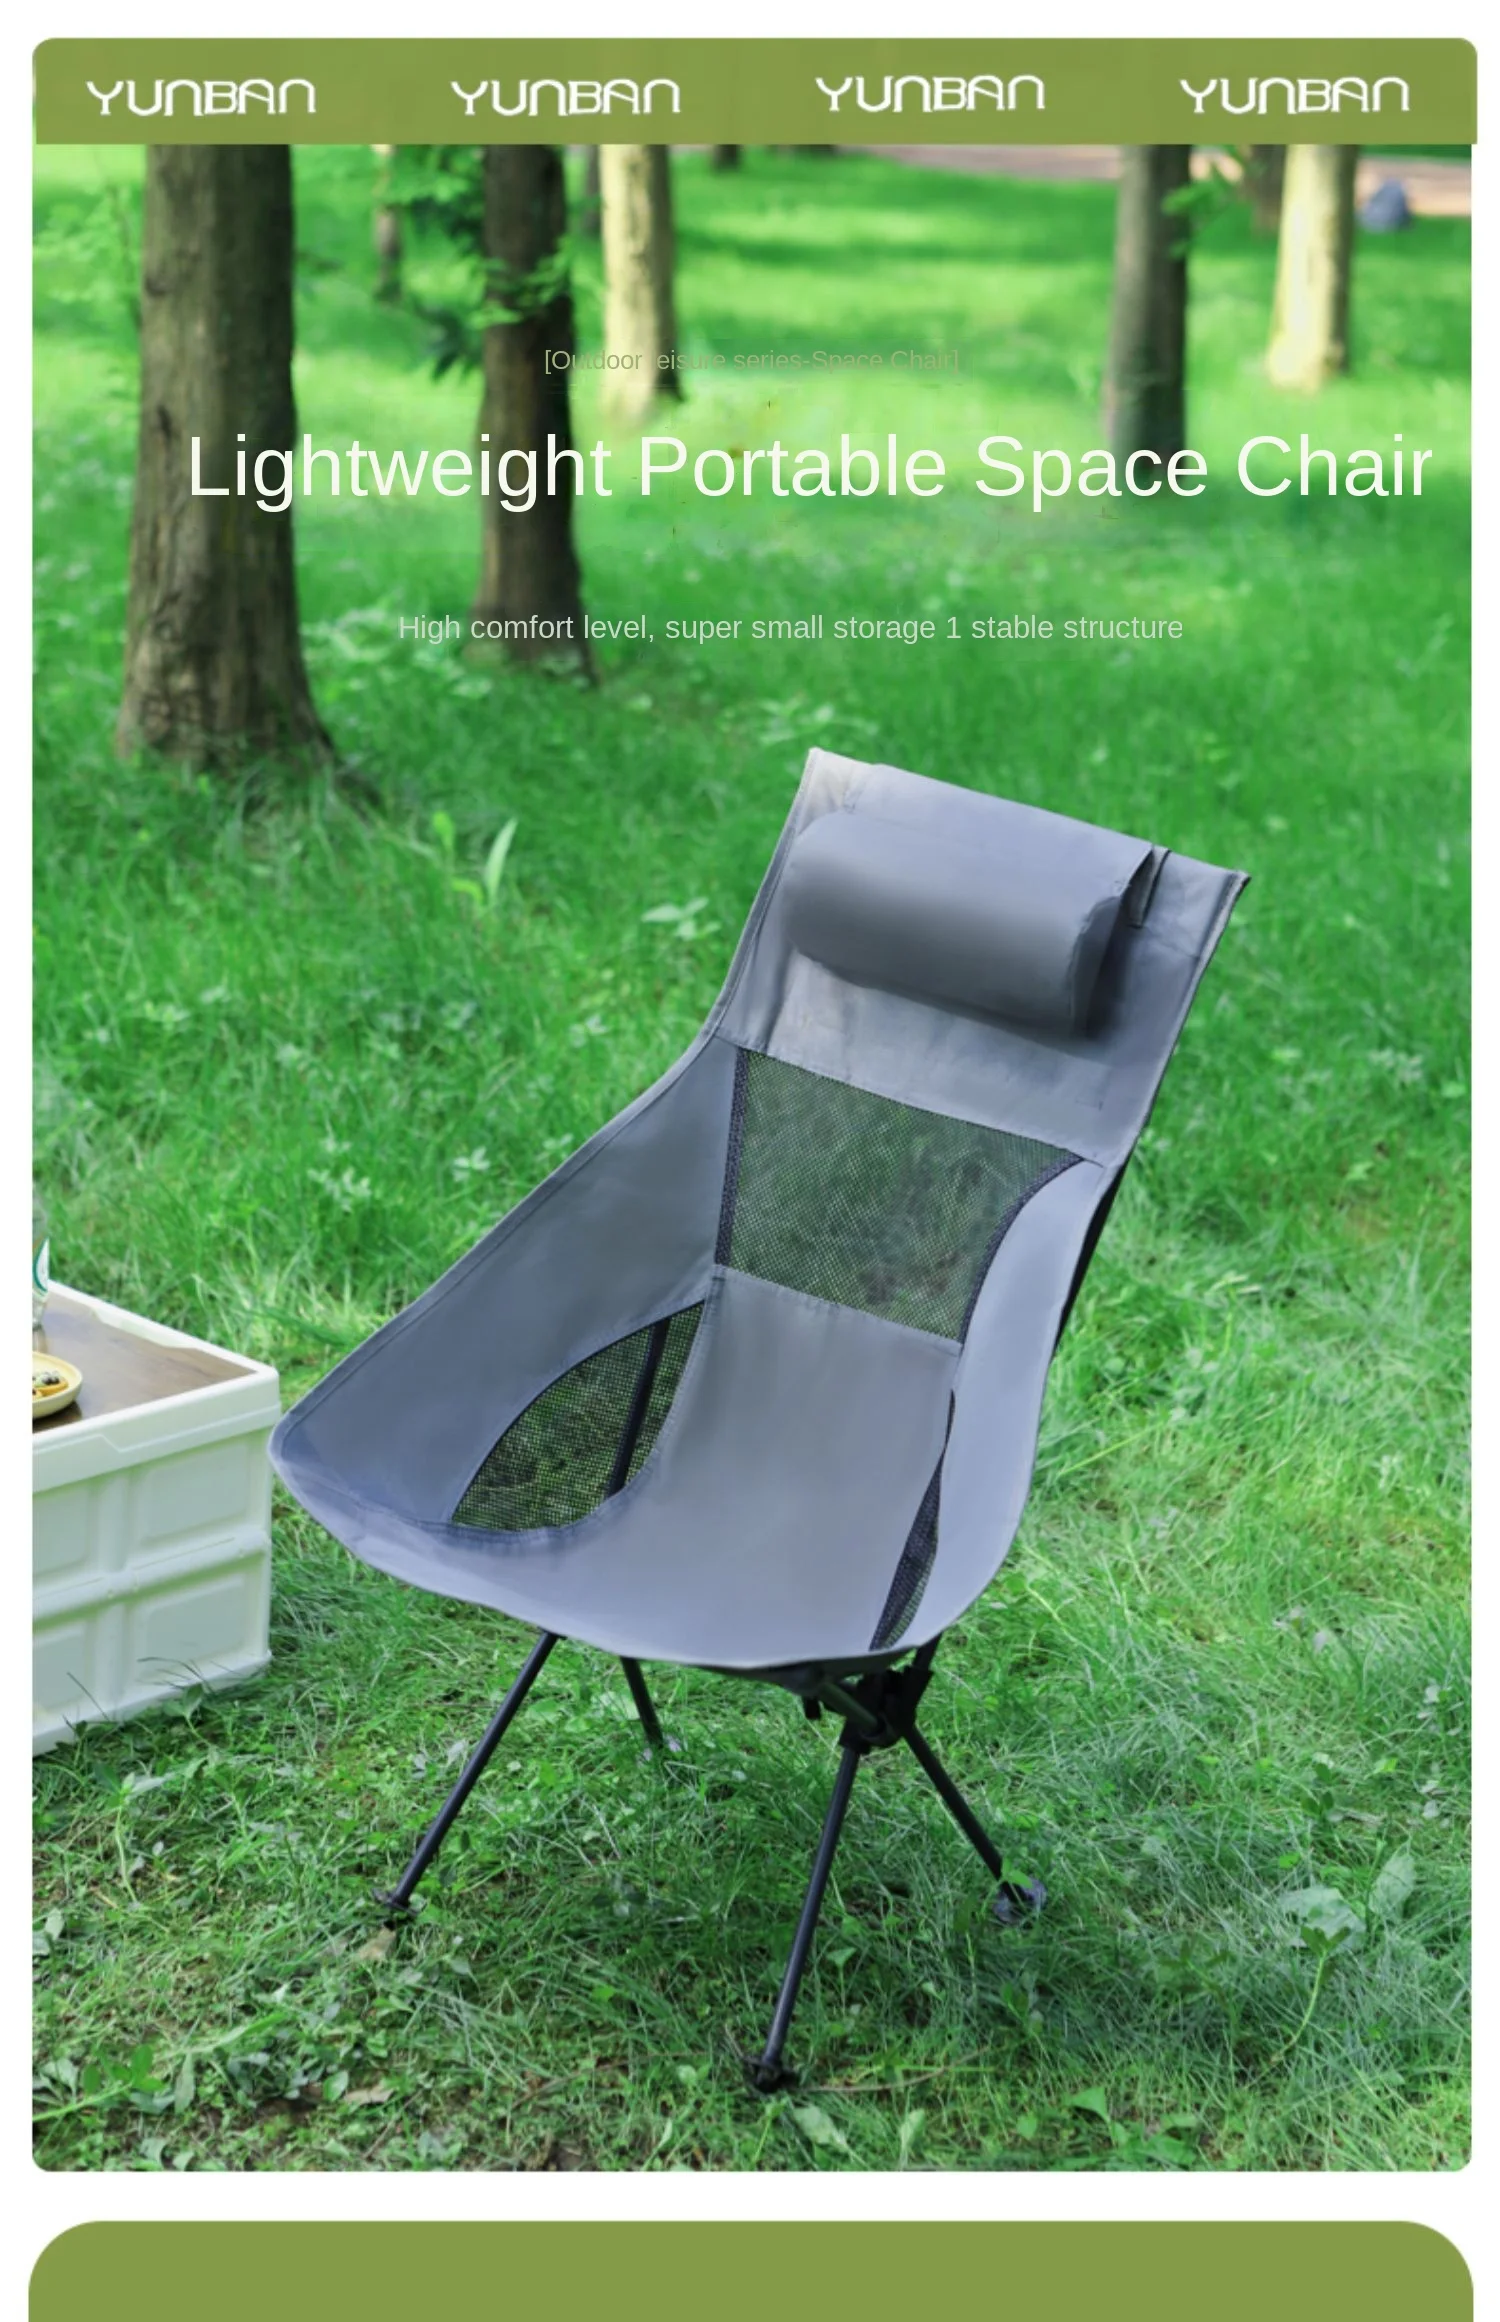 

outdoor folding space camping moon chair sketch portable fishing stool spring outing picnic beach chair